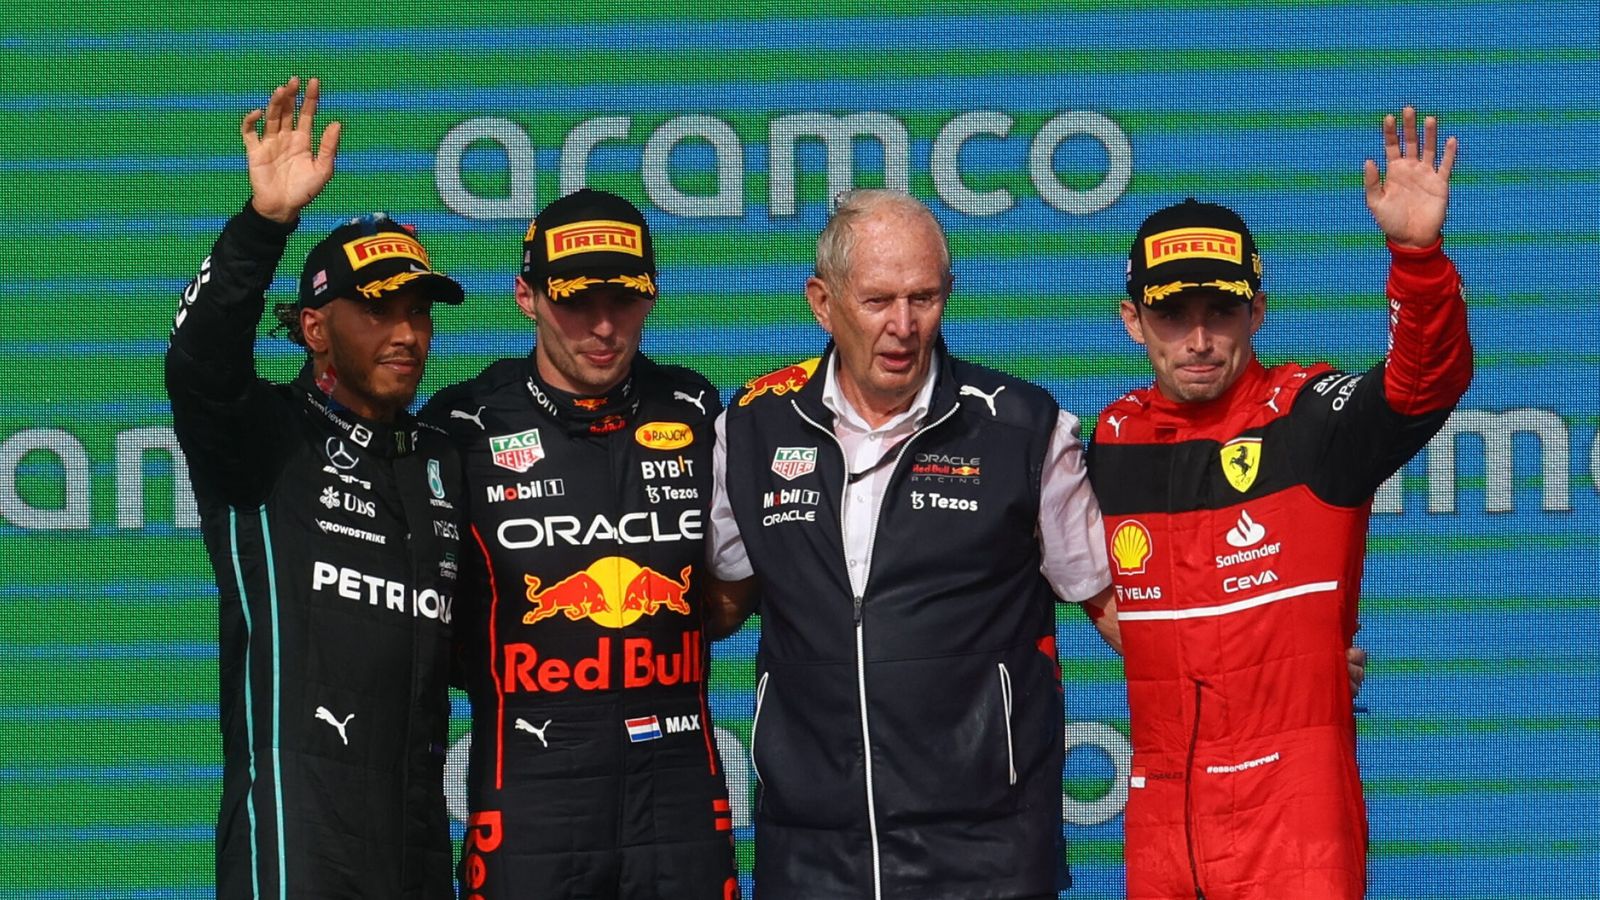 Formula One F1 - United States Grand Prix - Circuit of the Americas, Austin, Texas, U.S. - October 23, 2022 Red Bull's Max Verstappen celebrates on the podium after winning the United States Grand Prix with second placed Mercedes' Lewis Hamilton, third placed Ferrari's Charles Leclerc and Red Bull advisor Helmut Marko REUTERS Mike Segar